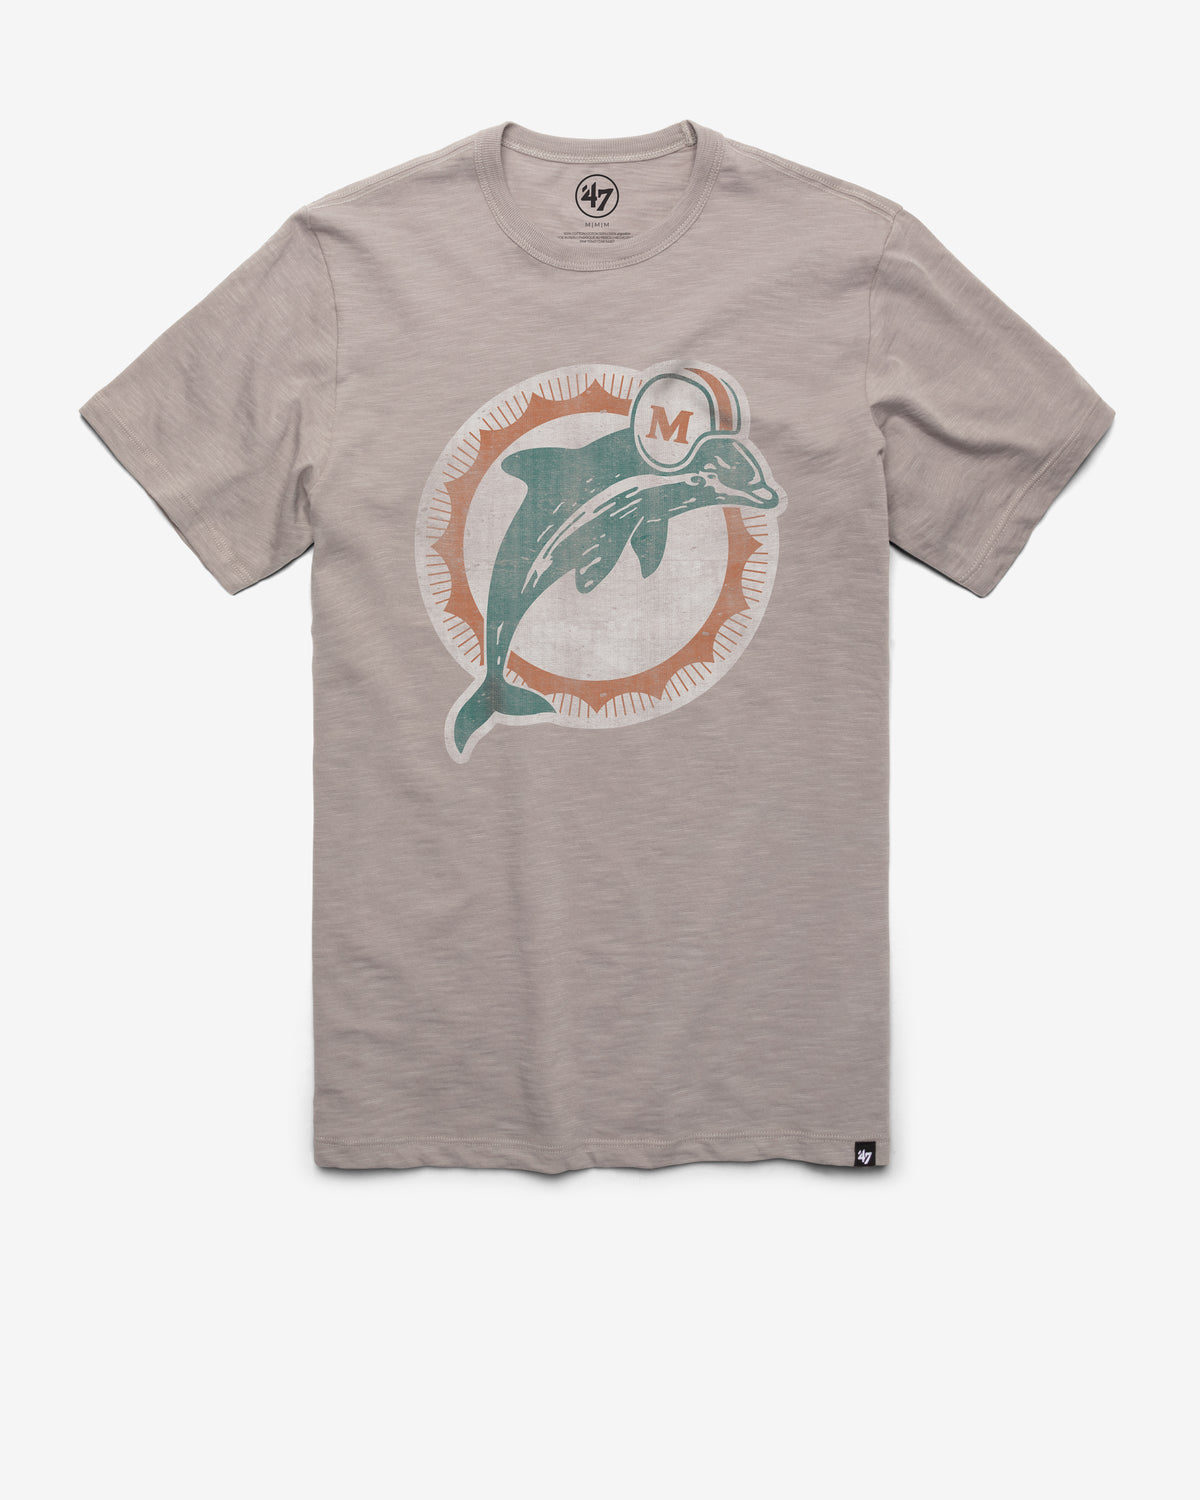 MIAMI DOLPHINS HISTORIC GRIT '47 SCRUM TEE